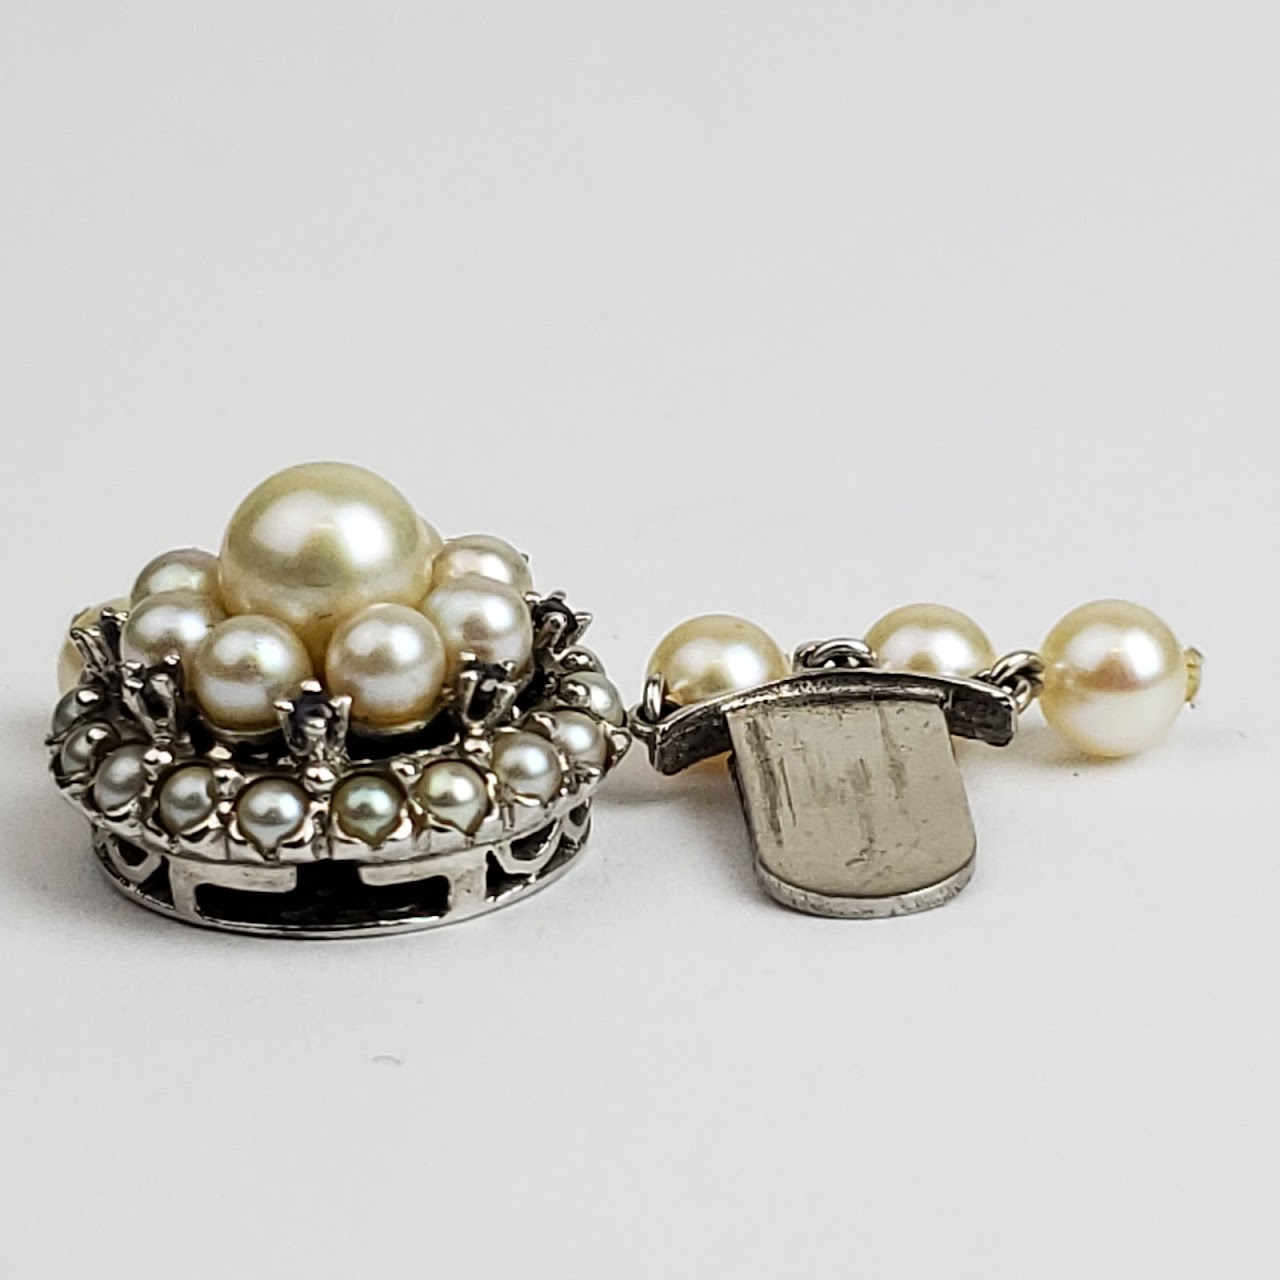 14K White Gold & Pearl Clasp